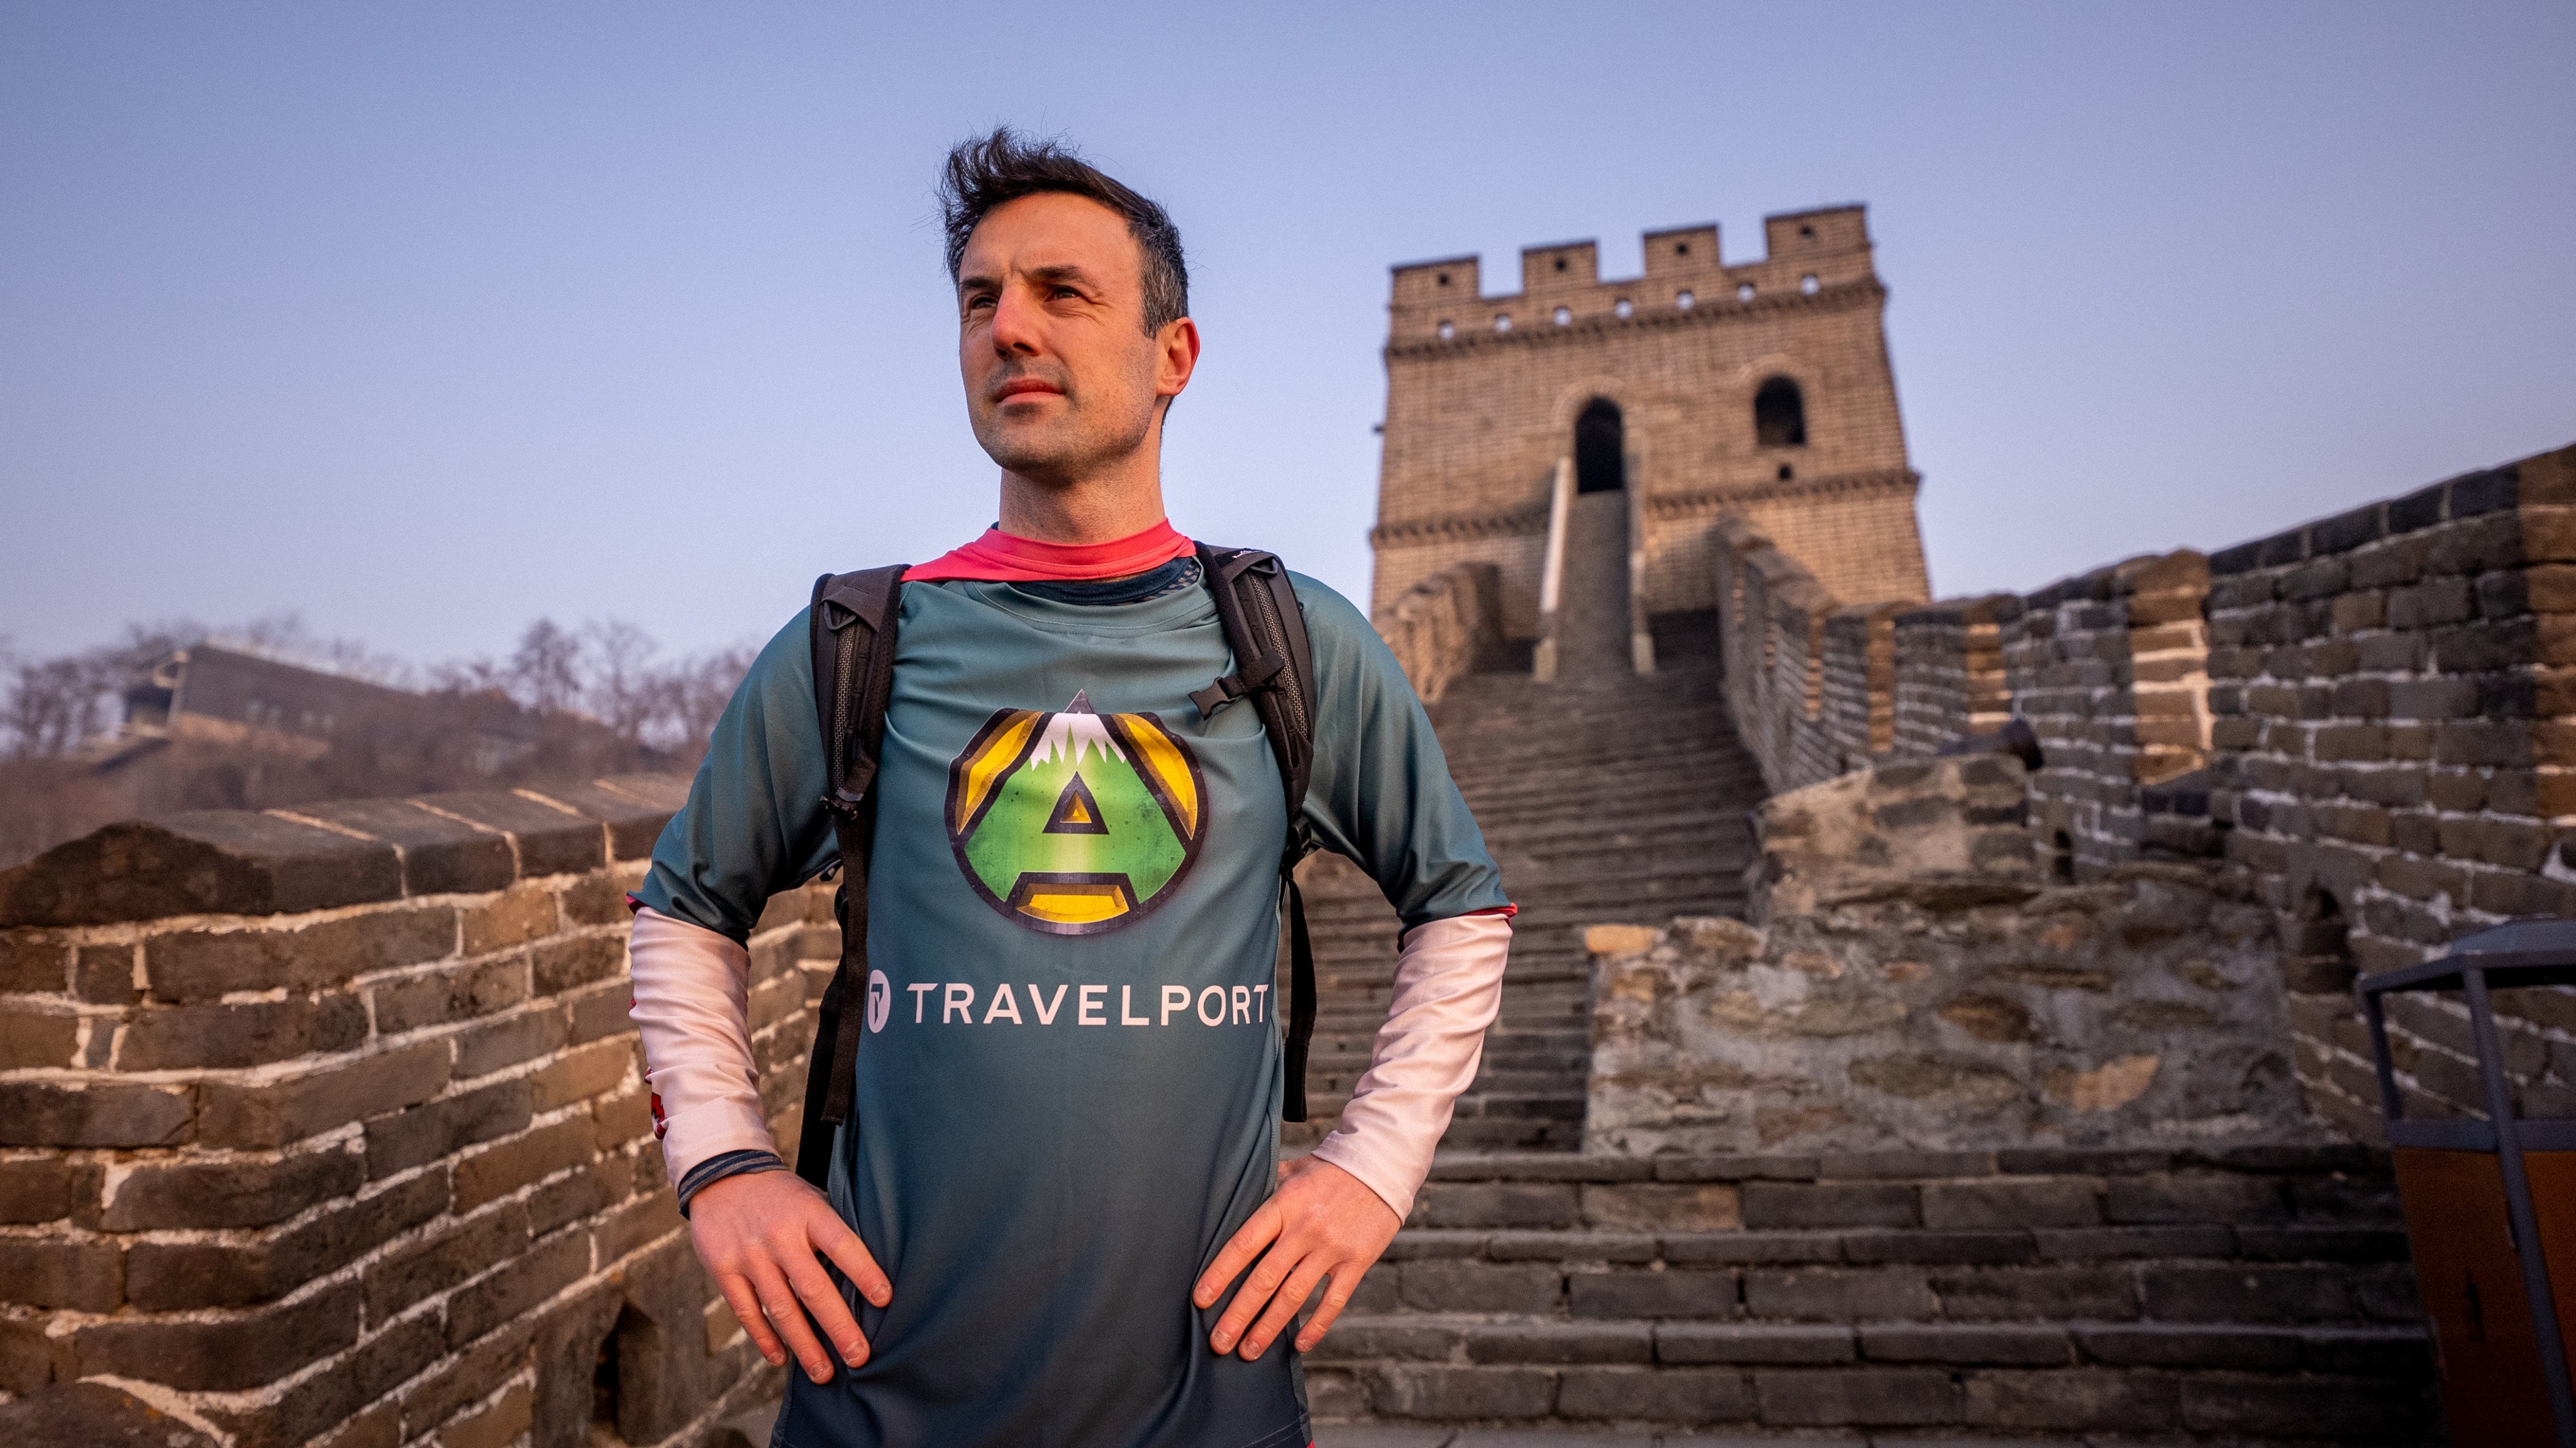 Jamie McDonald’s world-record-breaking journey to all Seven “New Wonders of the World” in seven days piqued Post readers’ interest in 2023. See what other travel stories were among our most read this year. Photo: Travelport